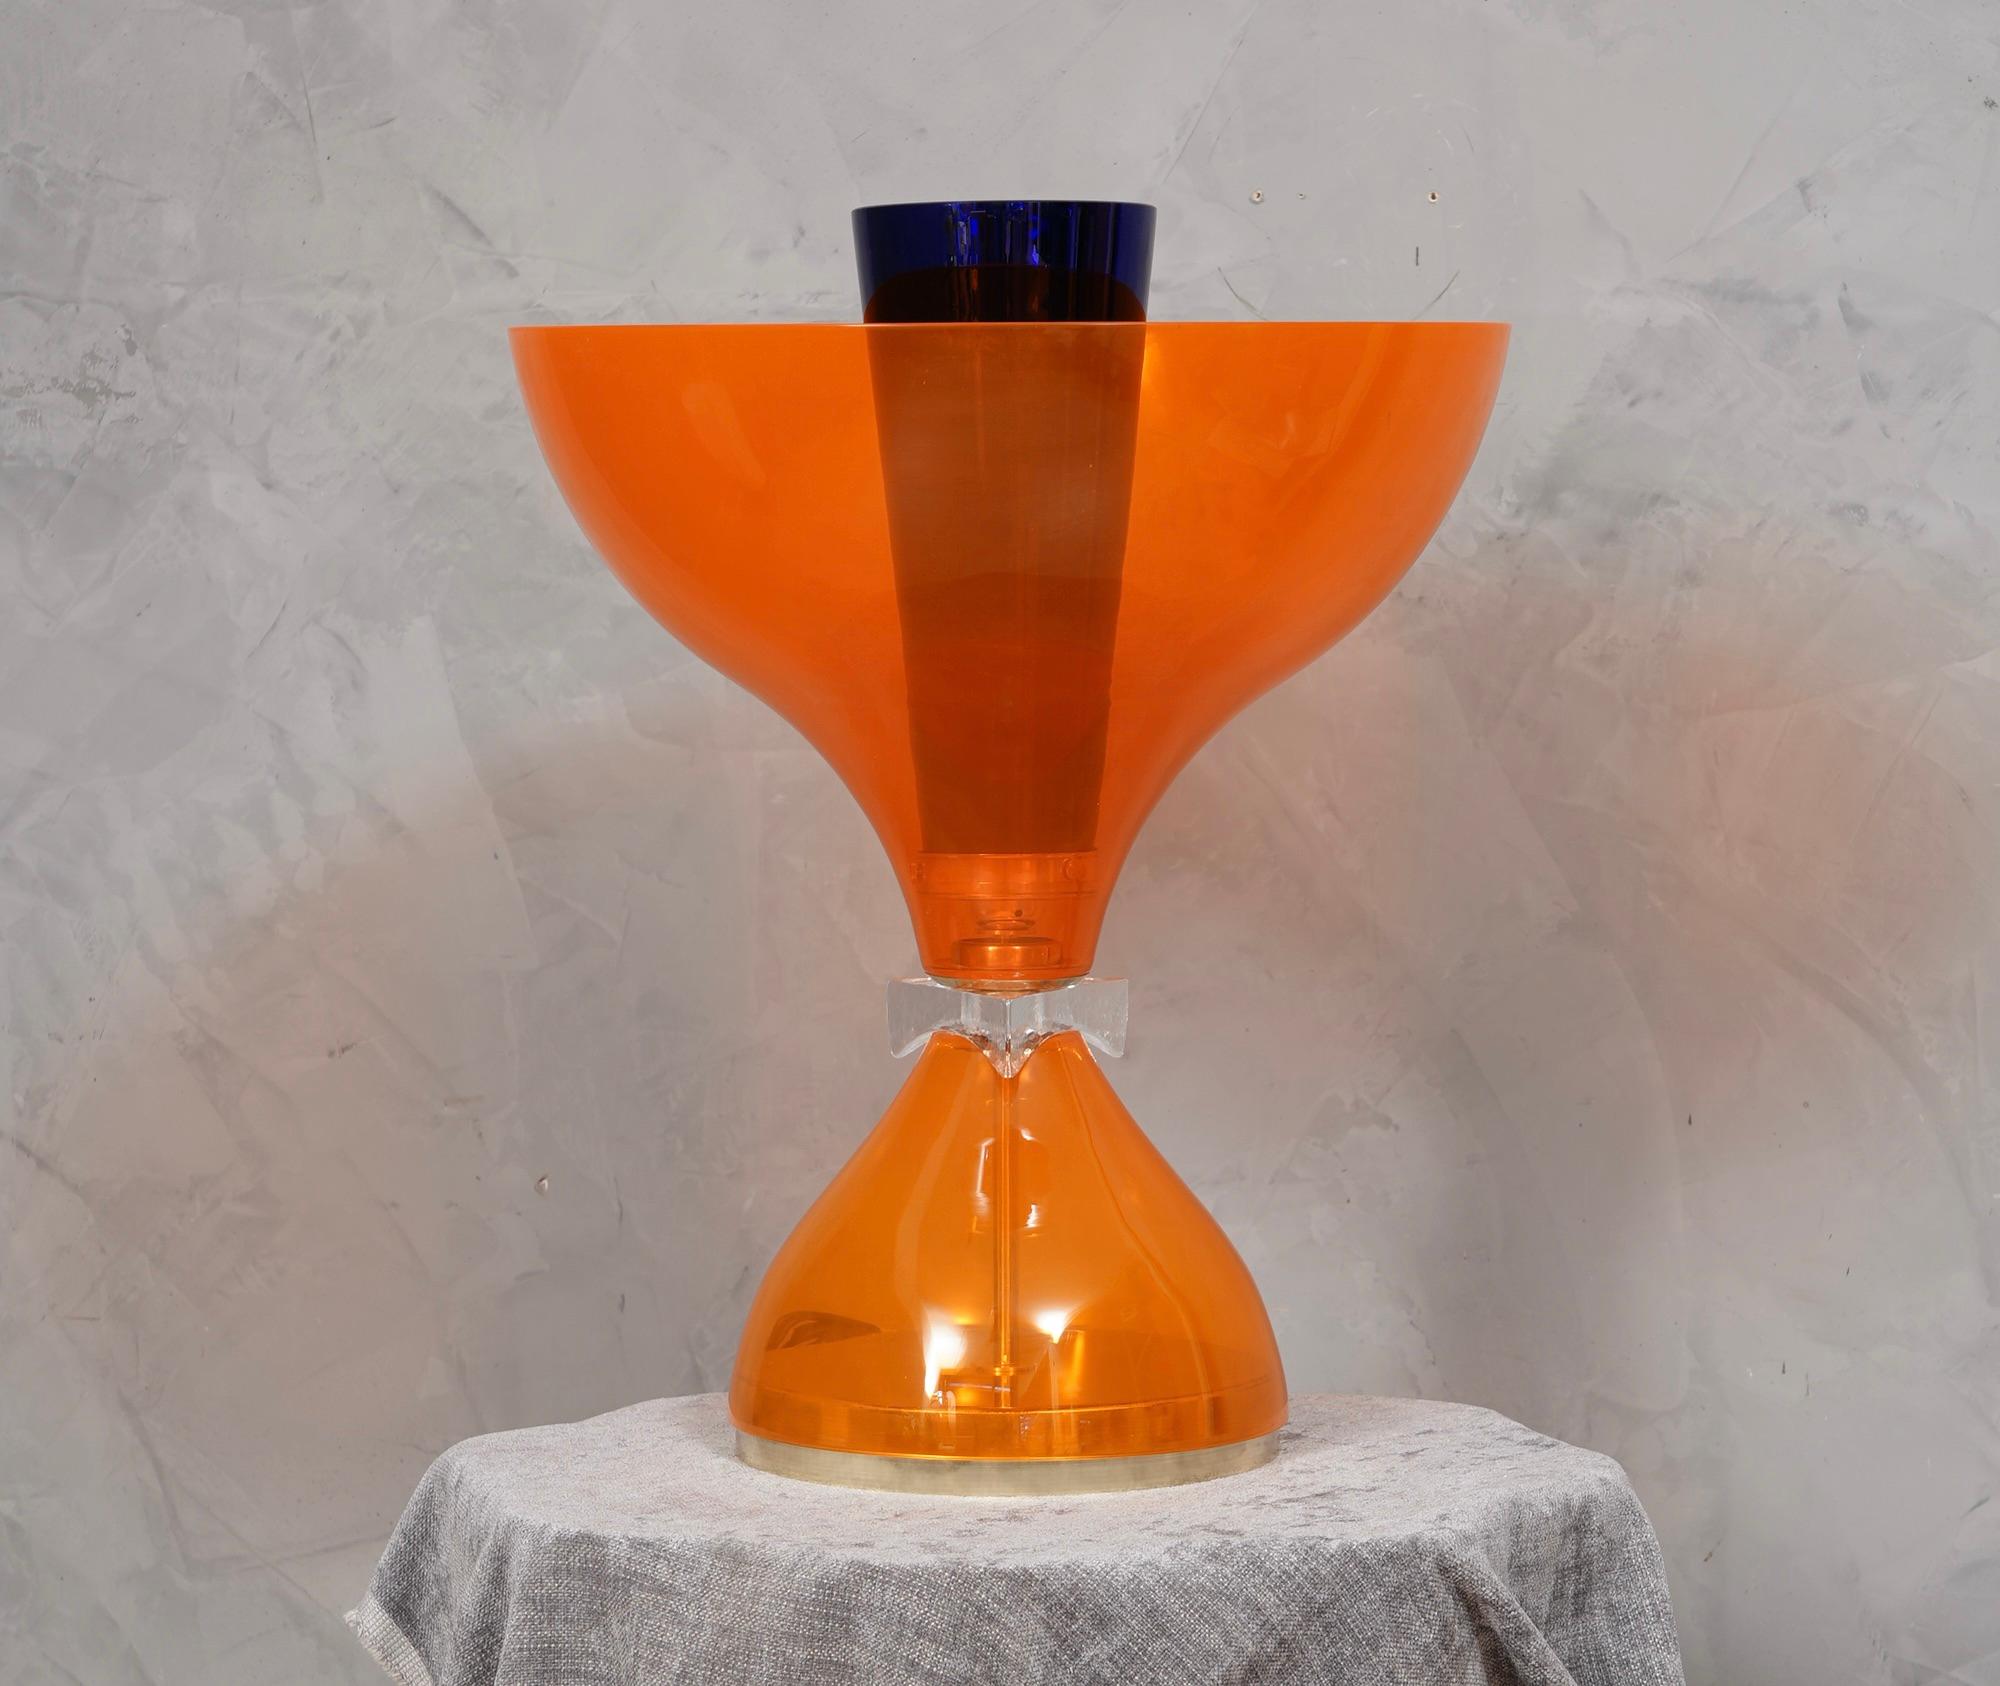 Stunning Murano lamps in the style of Vistosi, in a spectacular orange color. An uplifting transparent orange color.

The table lamp is made up of a large orange-colored Murano glass bowl, placed on top of an orange colored Murano glass counter-cup;